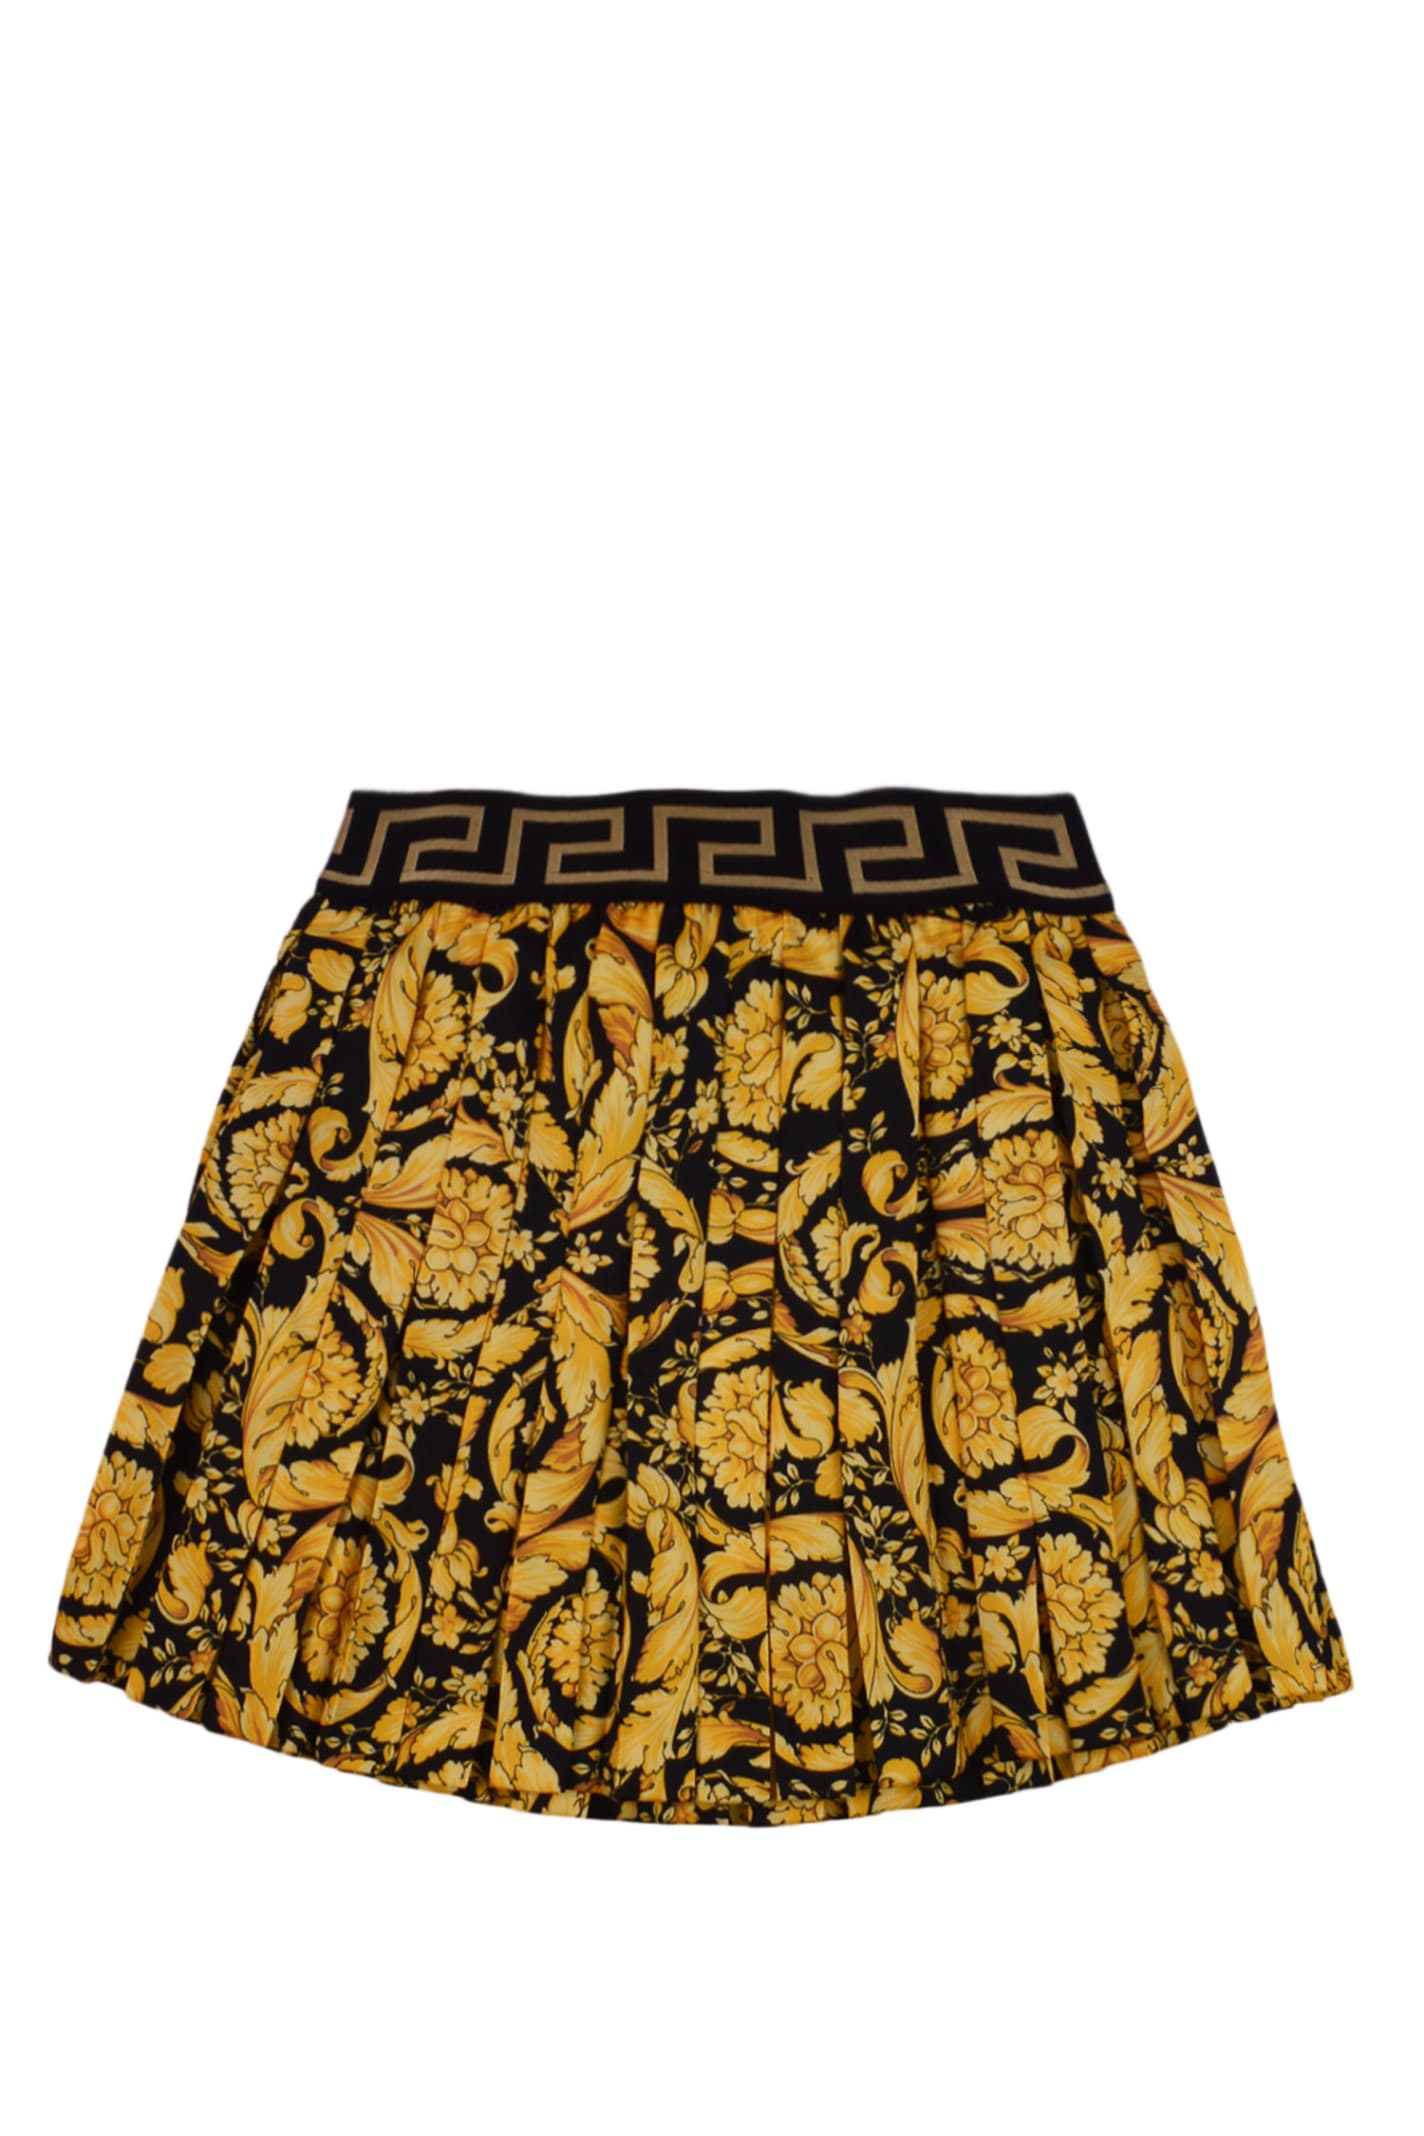 Versace Kids' Baroque Print Pleated Skirt In Gold